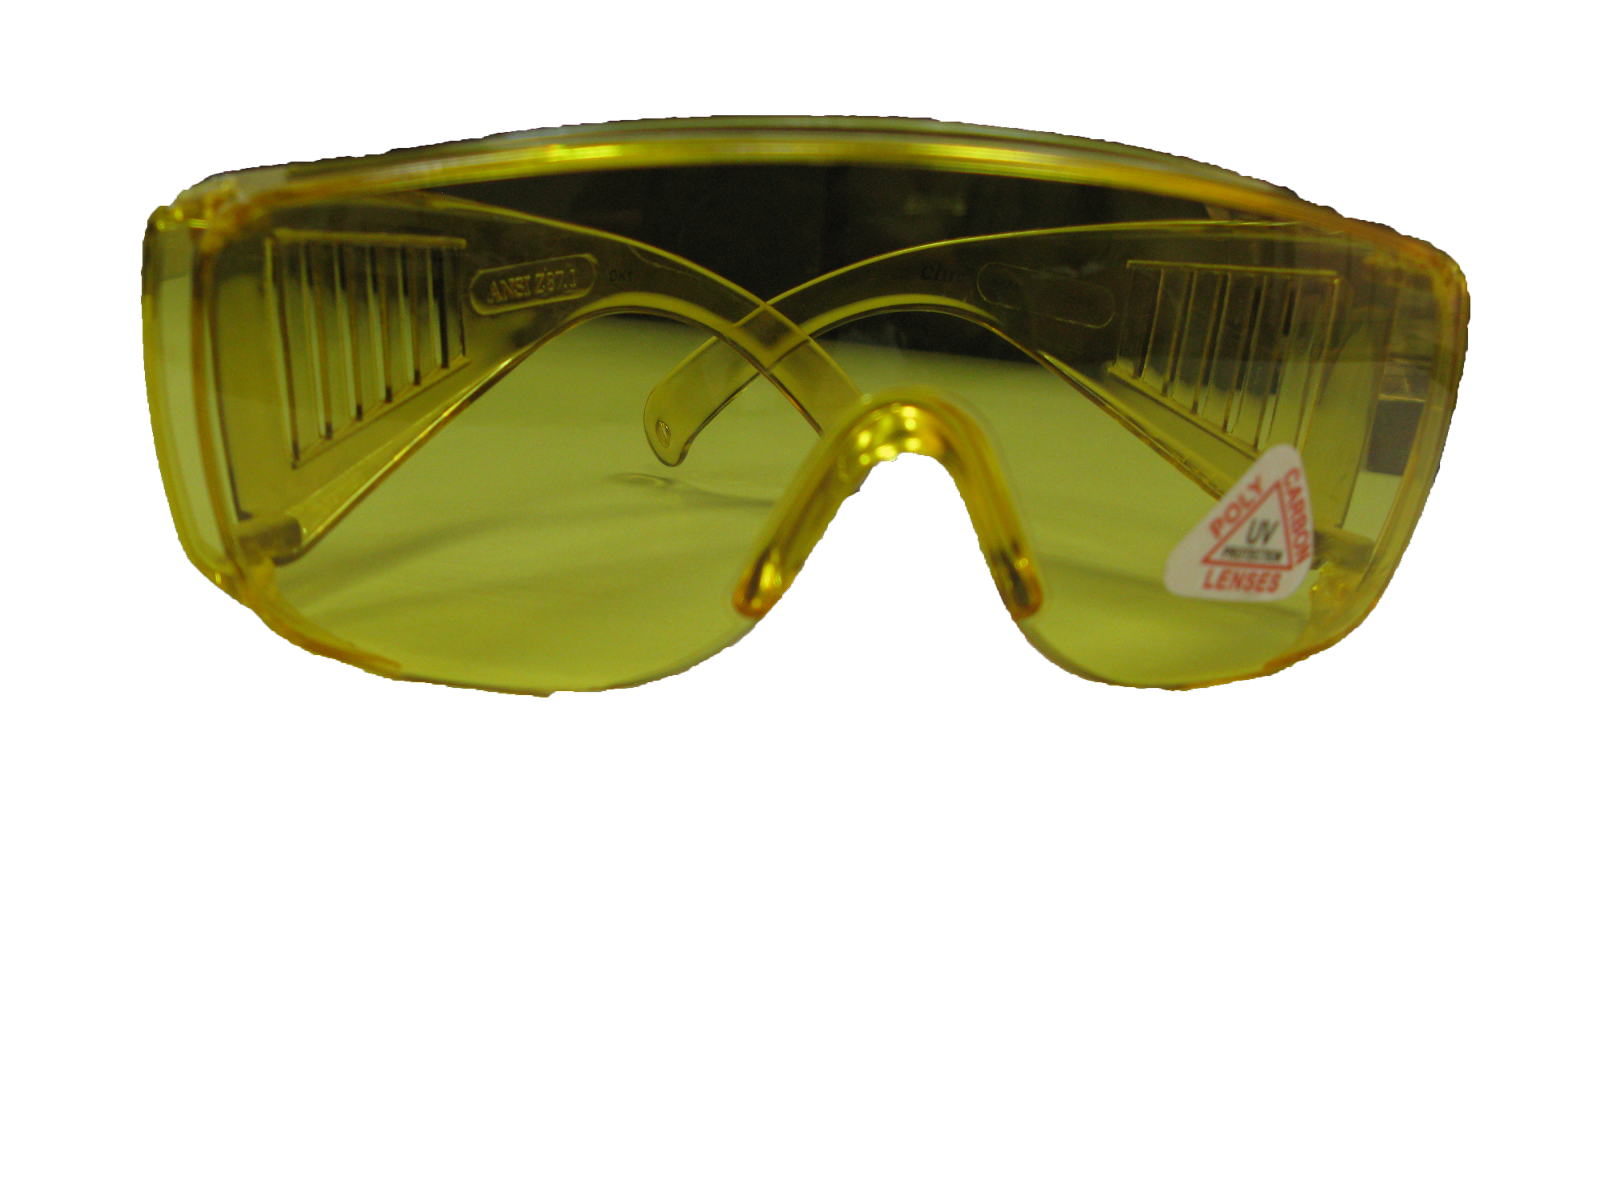 DK1 Safety Spectacles-DK1 UV Protection Safety Spectacles